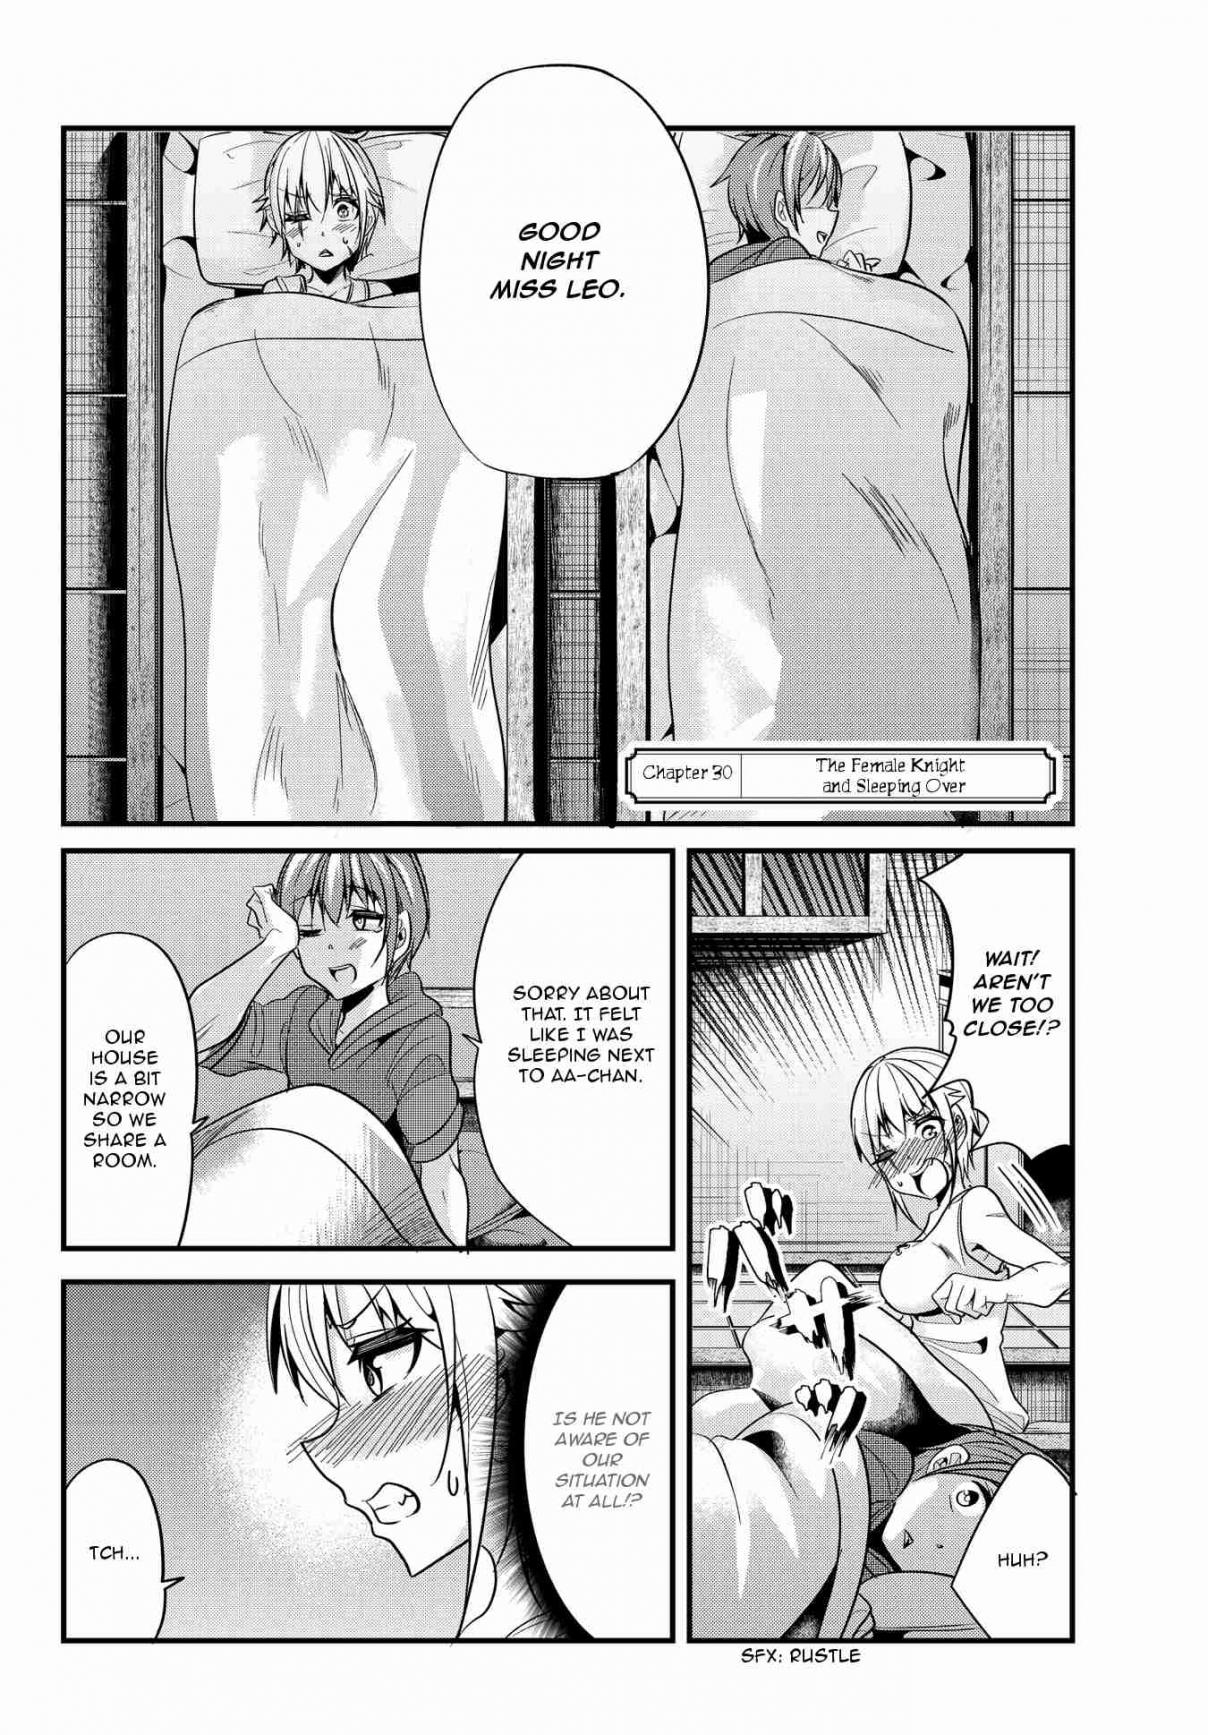 A Story About Treating a Female Knight, Who Has Never Been Treated as a Woman, as a Woman Ch. 30 The Female Knight and Sleeping Over